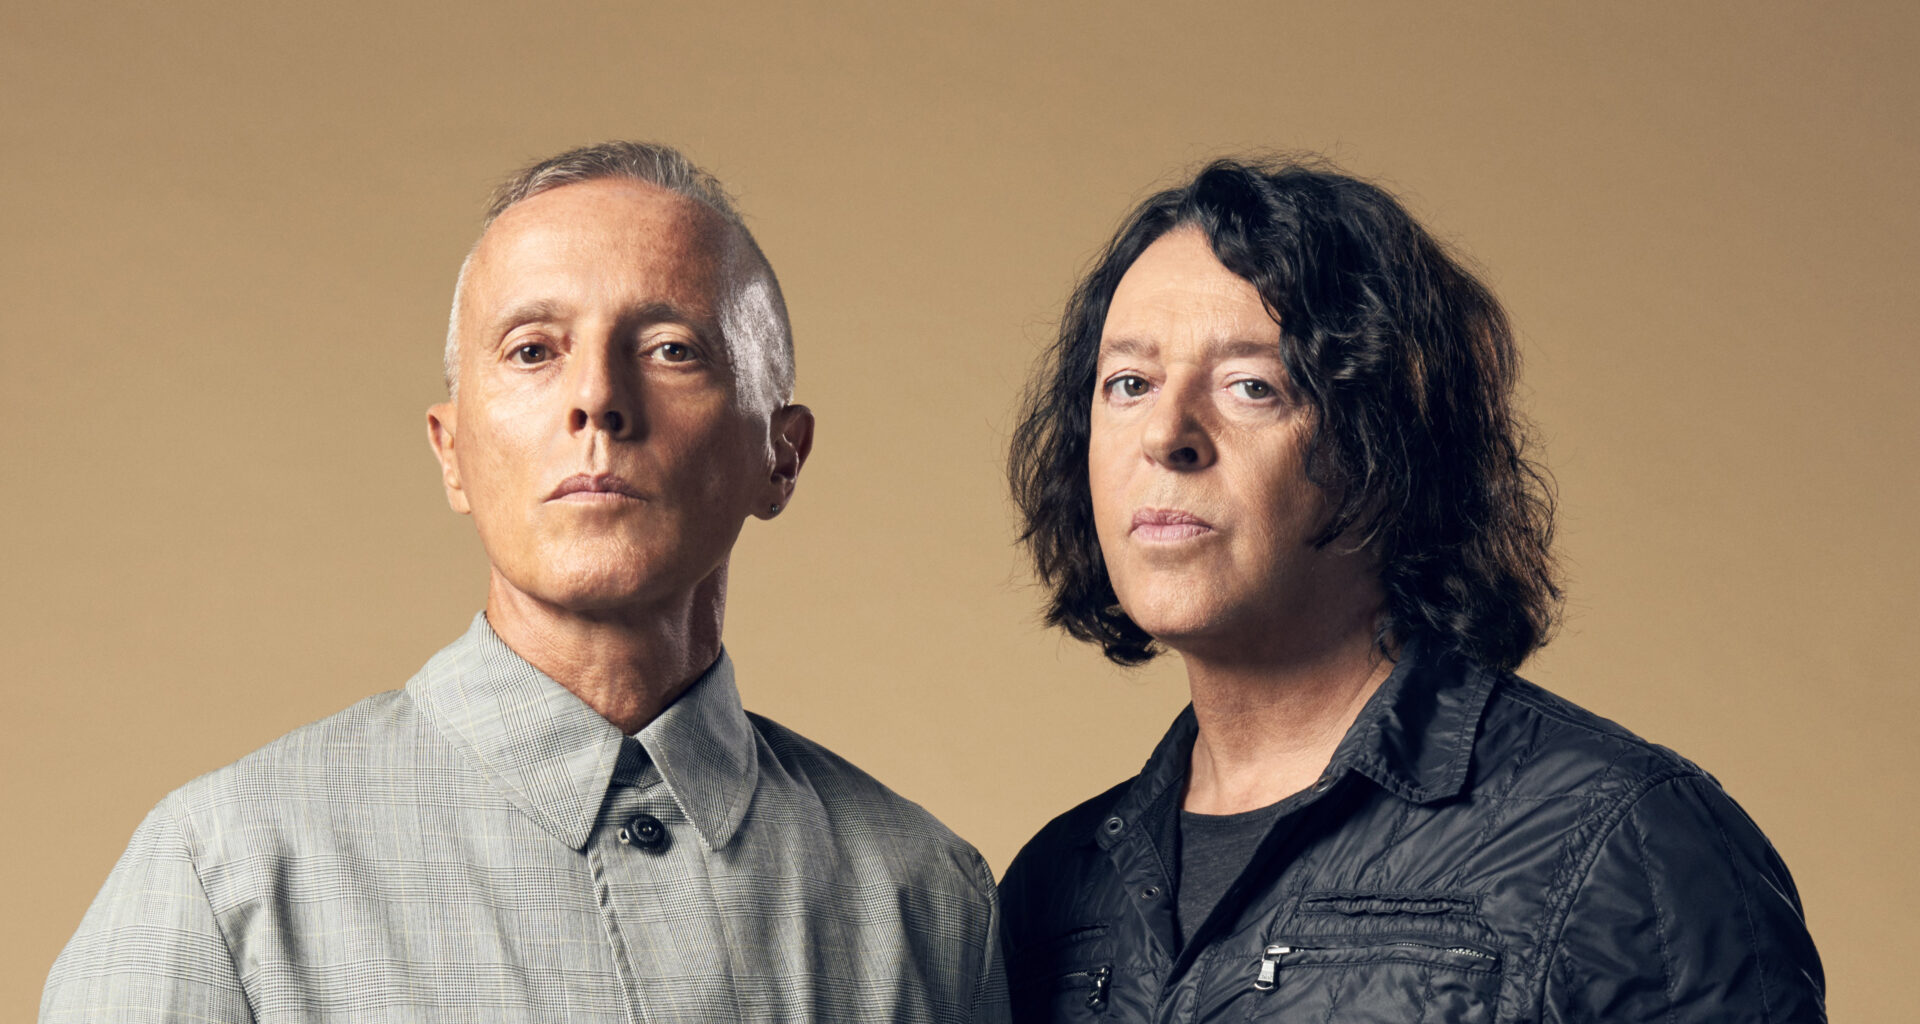 LYRICS – I LOVE YOU BUT I'M LOST – Tears for Fears Travel Fans